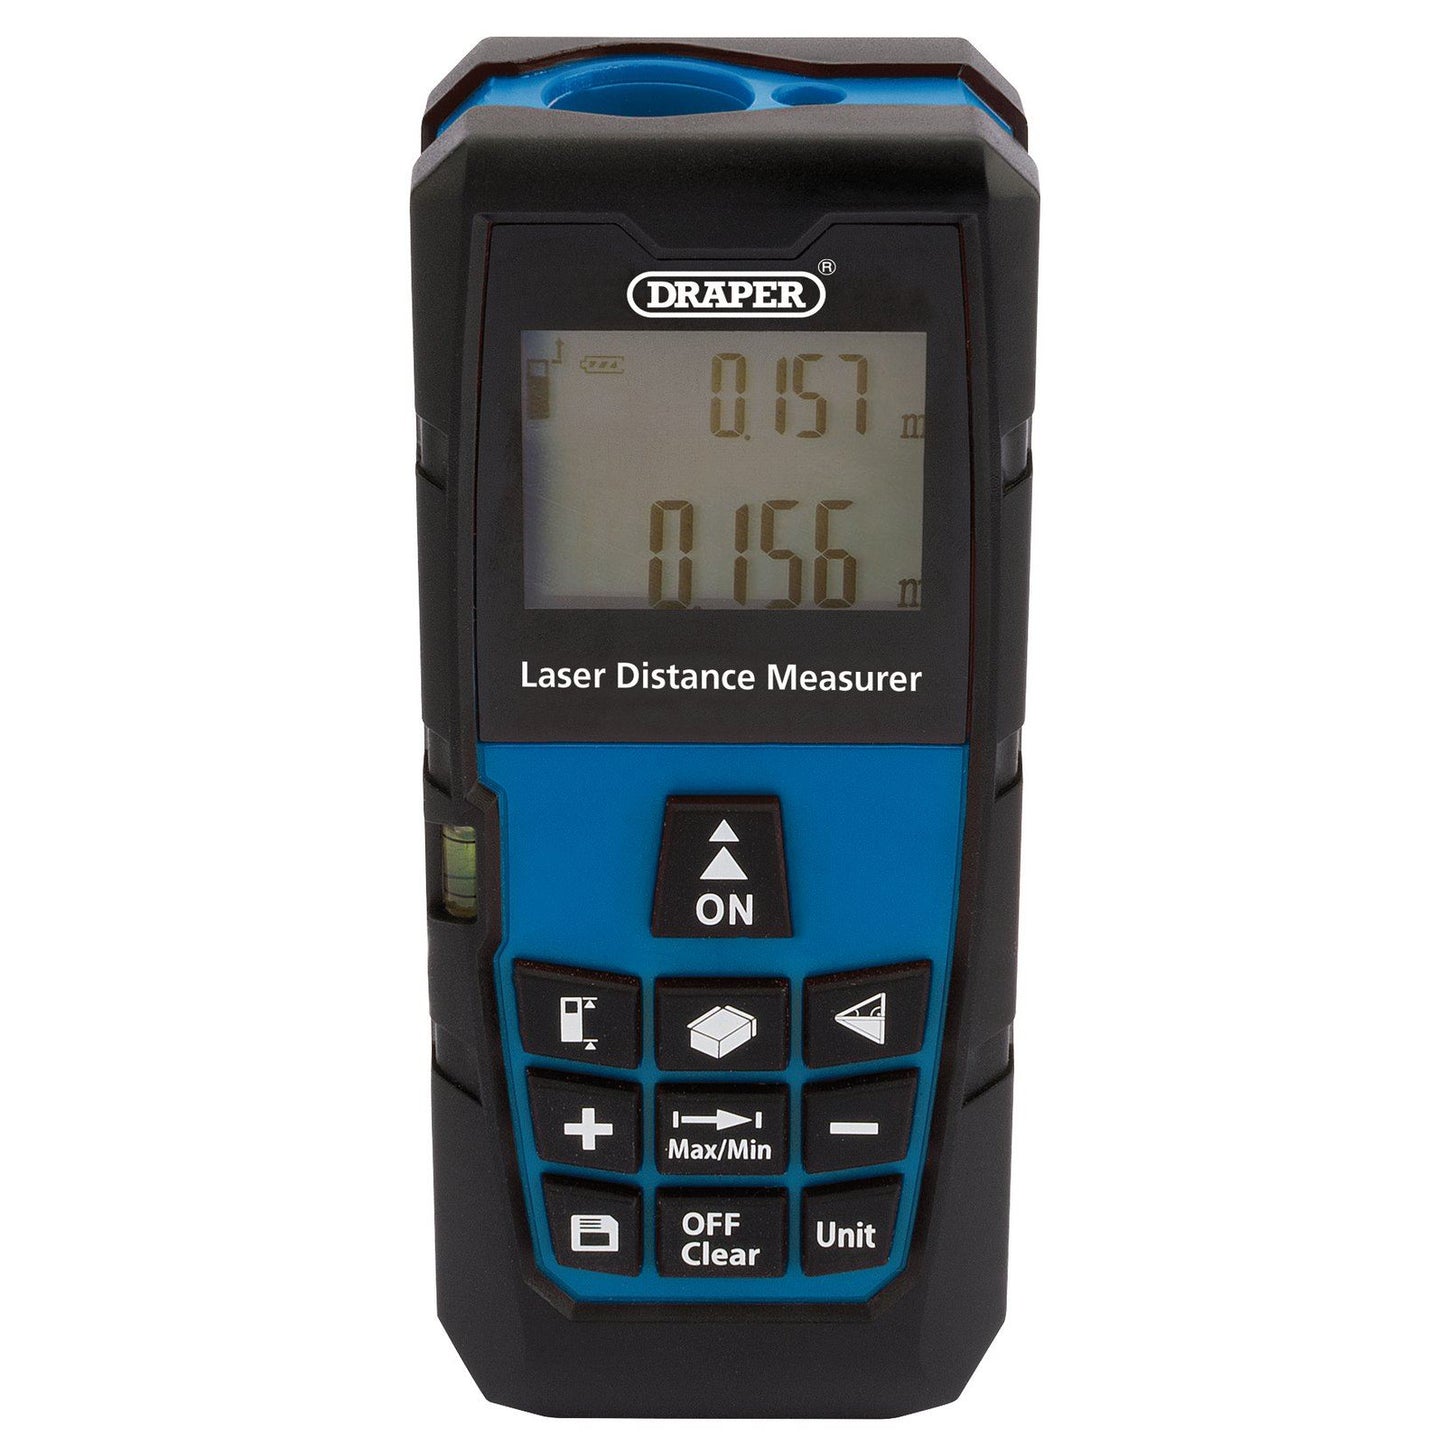 Draper 15102 Laser Distance Measurer 40M/132ft Metric/Imperial with LED Display